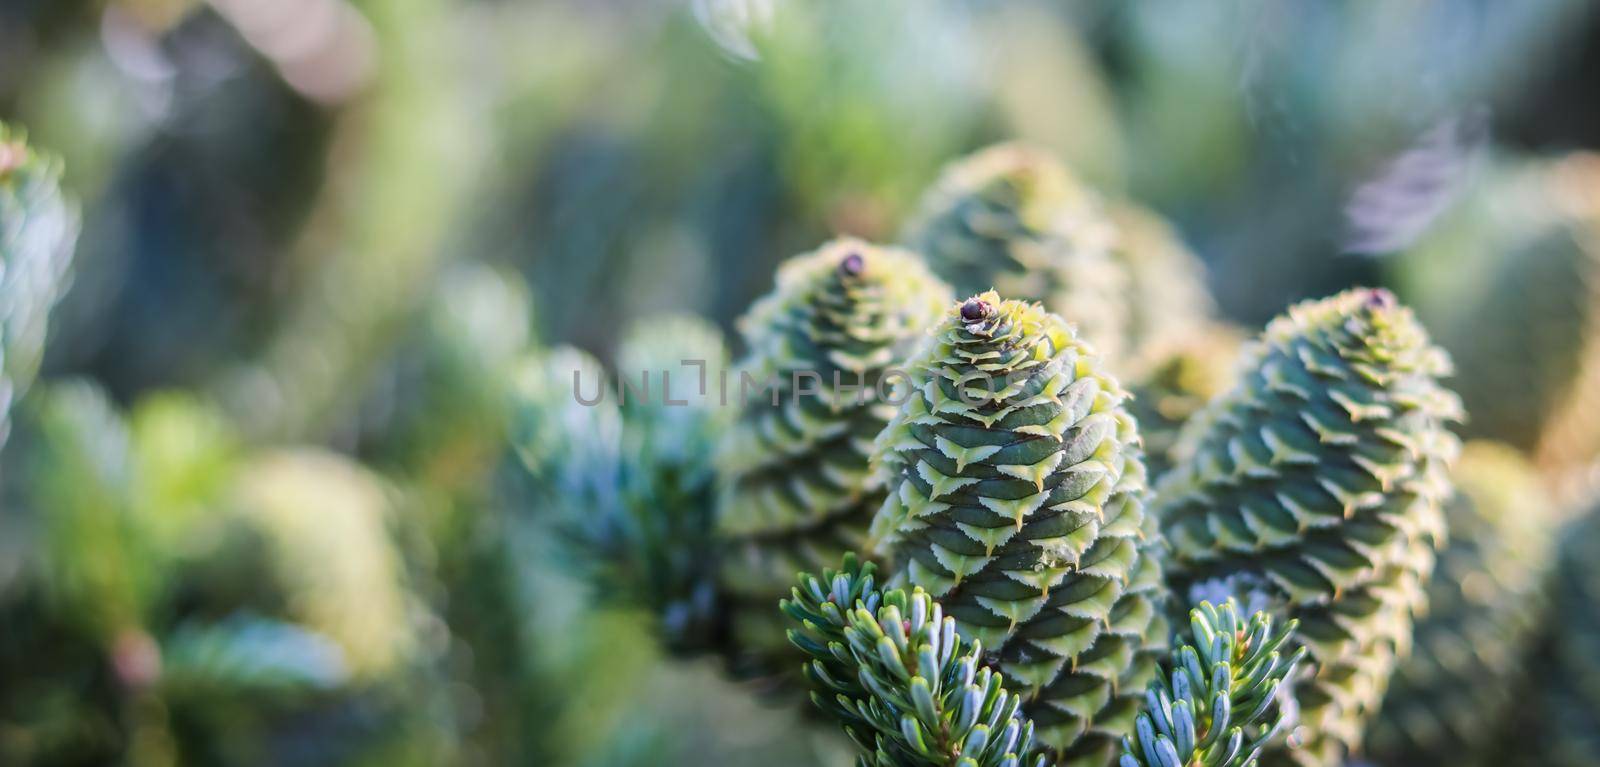 A branch of Korean fir with cones on blurred background by Olayola